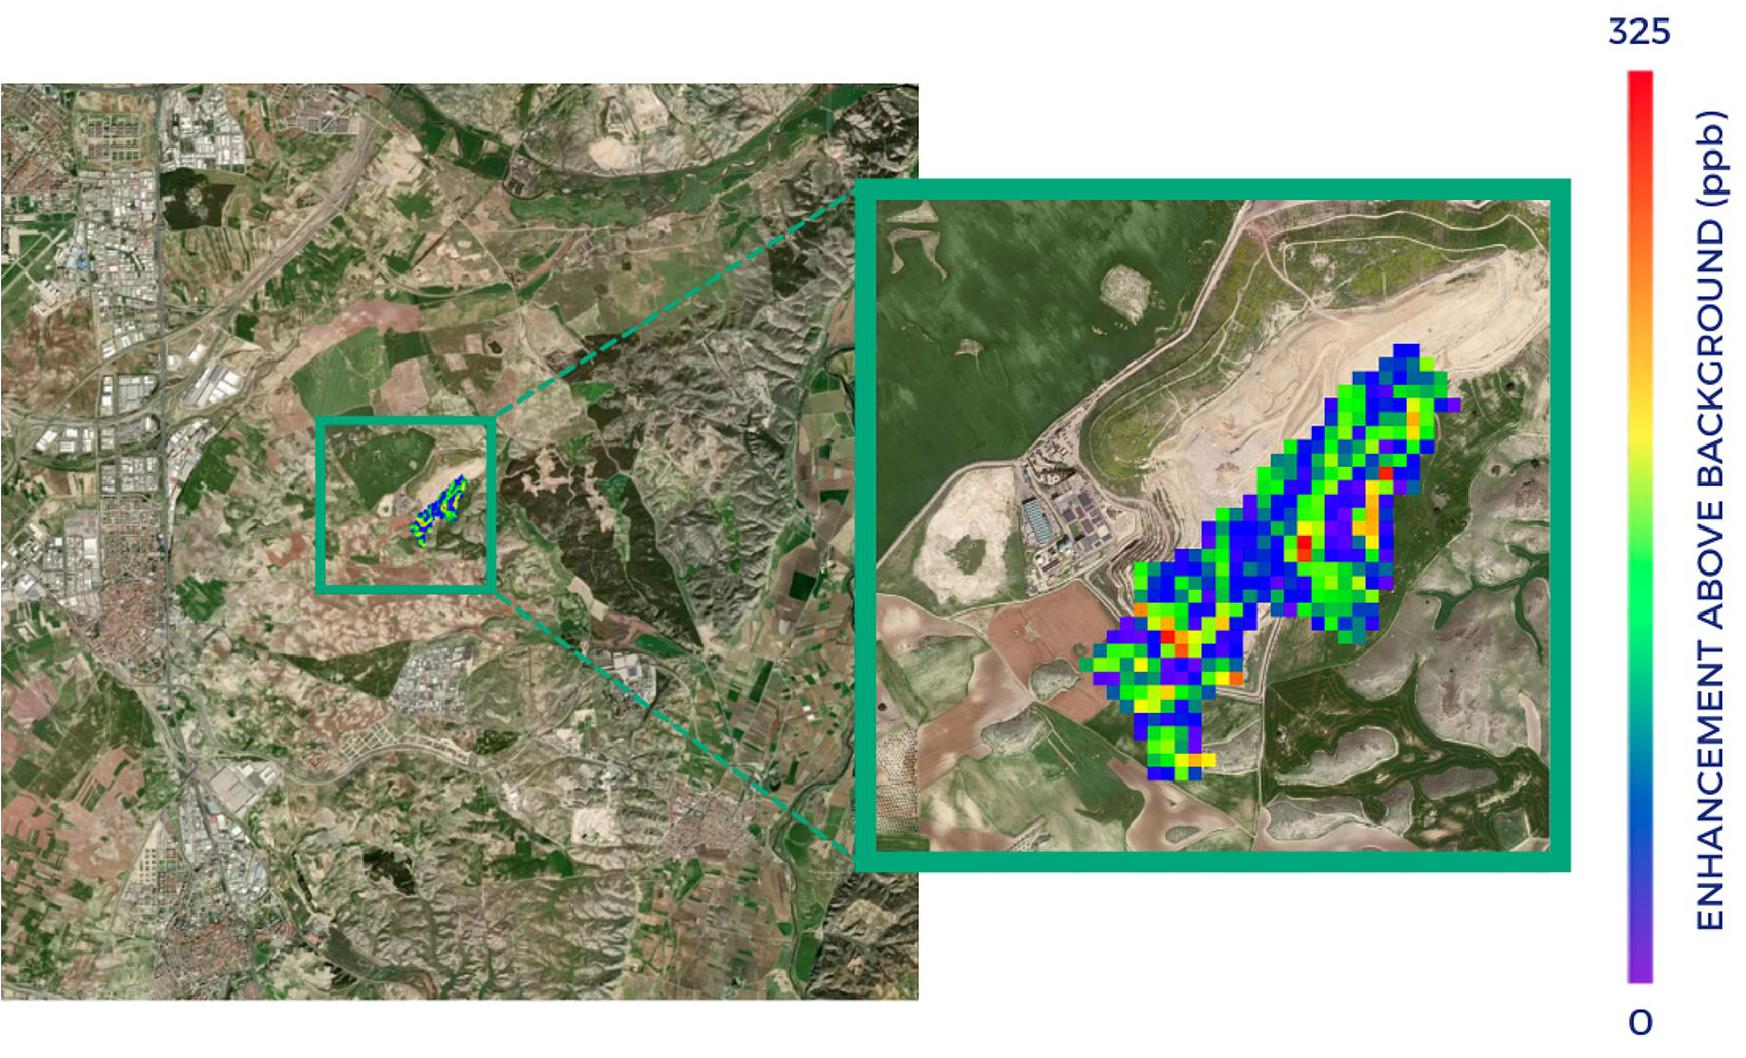 Figure 13: Methane plumes were again observed at the Spanish landfill sites in October 2021. The GHGSat image shows the methane emissions from one of the landfill sites in Madrid on 13 October 2021 (image credit: GHGSat)